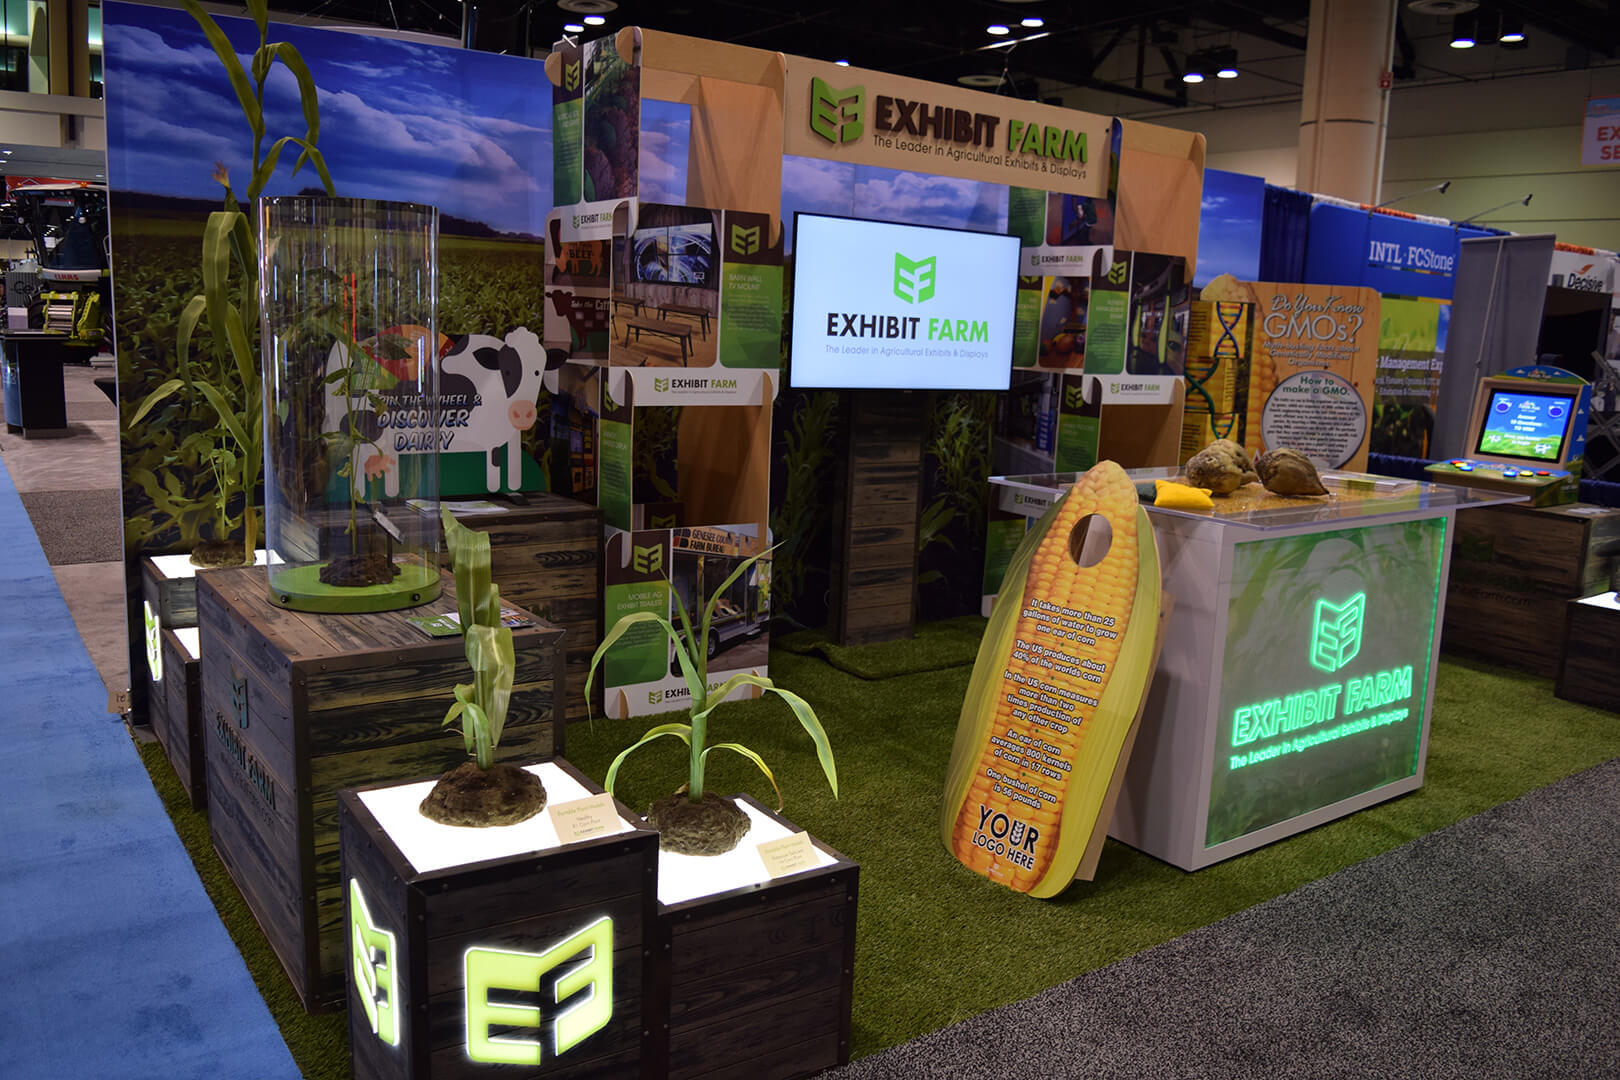 Exhibit Farm's trade show booth, showing many of its products